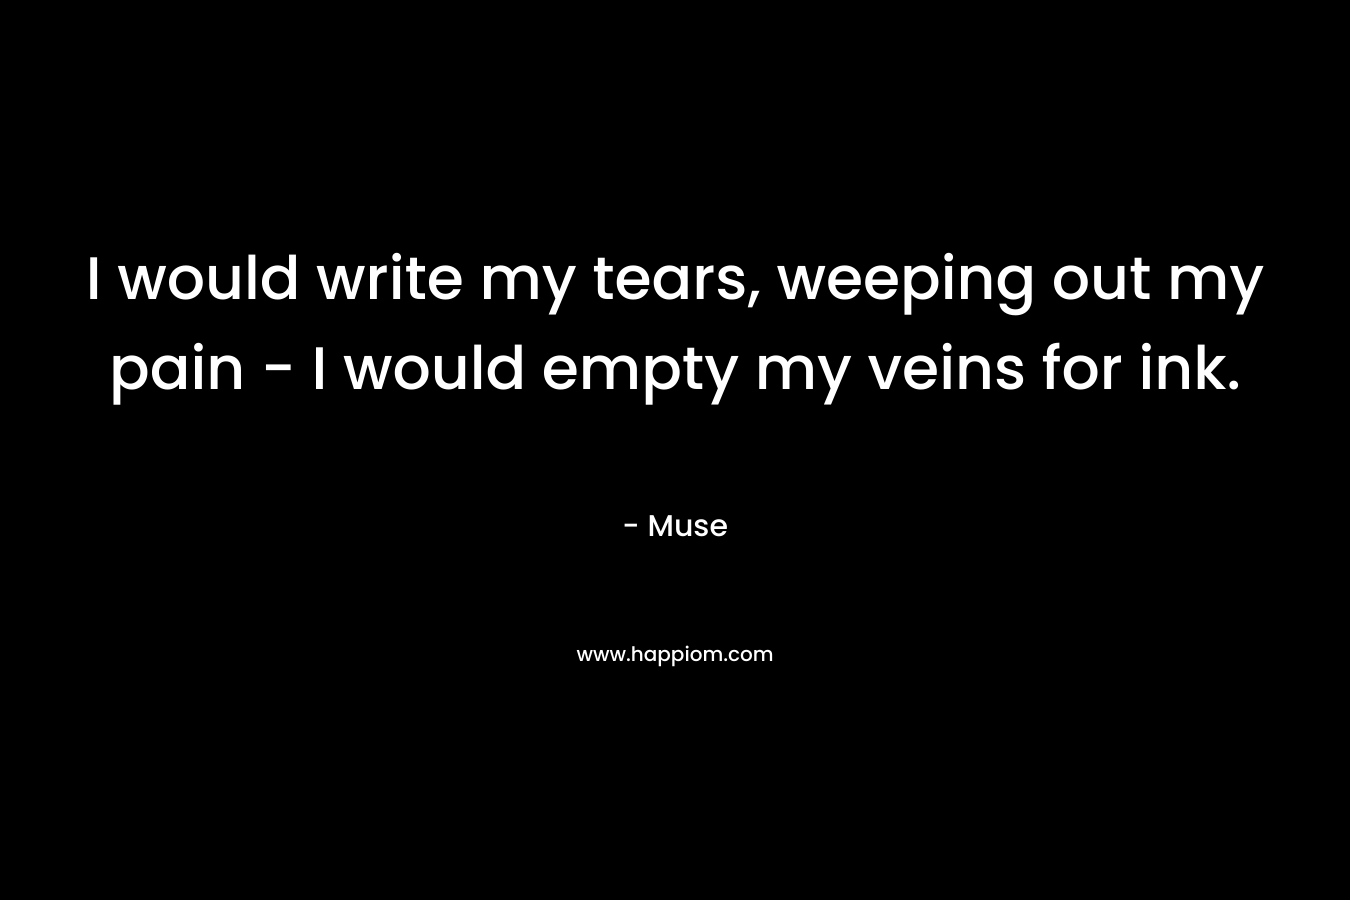 I would write my tears, weeping out my pain - I would empty my veins for ink.